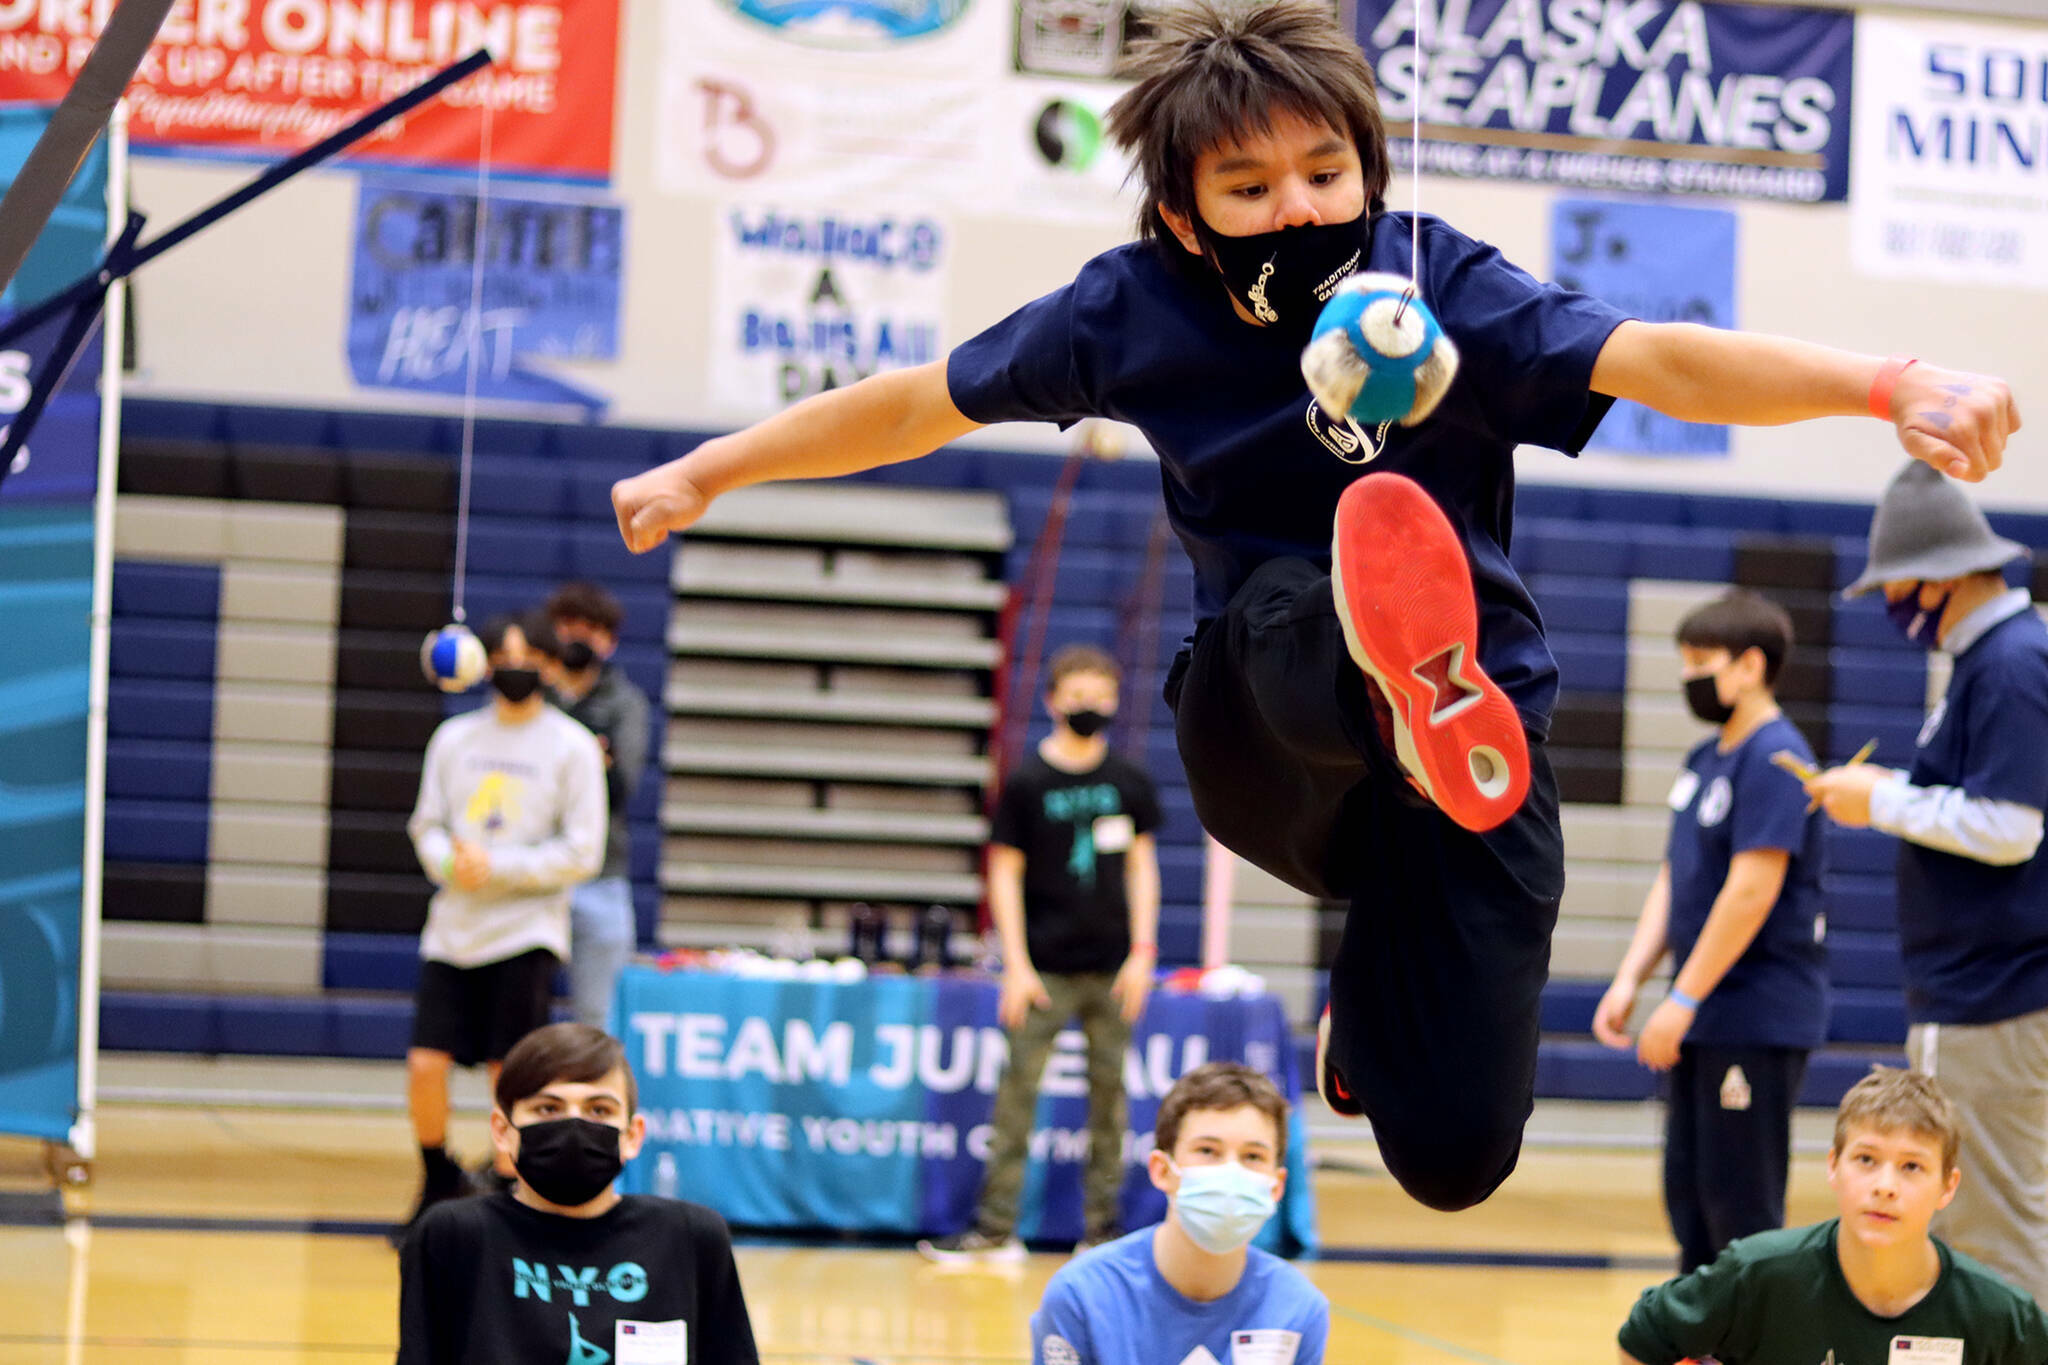 Donovan Jackson, 12, of Juneau competes in the one-foot high kick during the 2022 Traditional Games on April 2, 2022. (Ben Hohenstatt / Juneau Empire file photo)